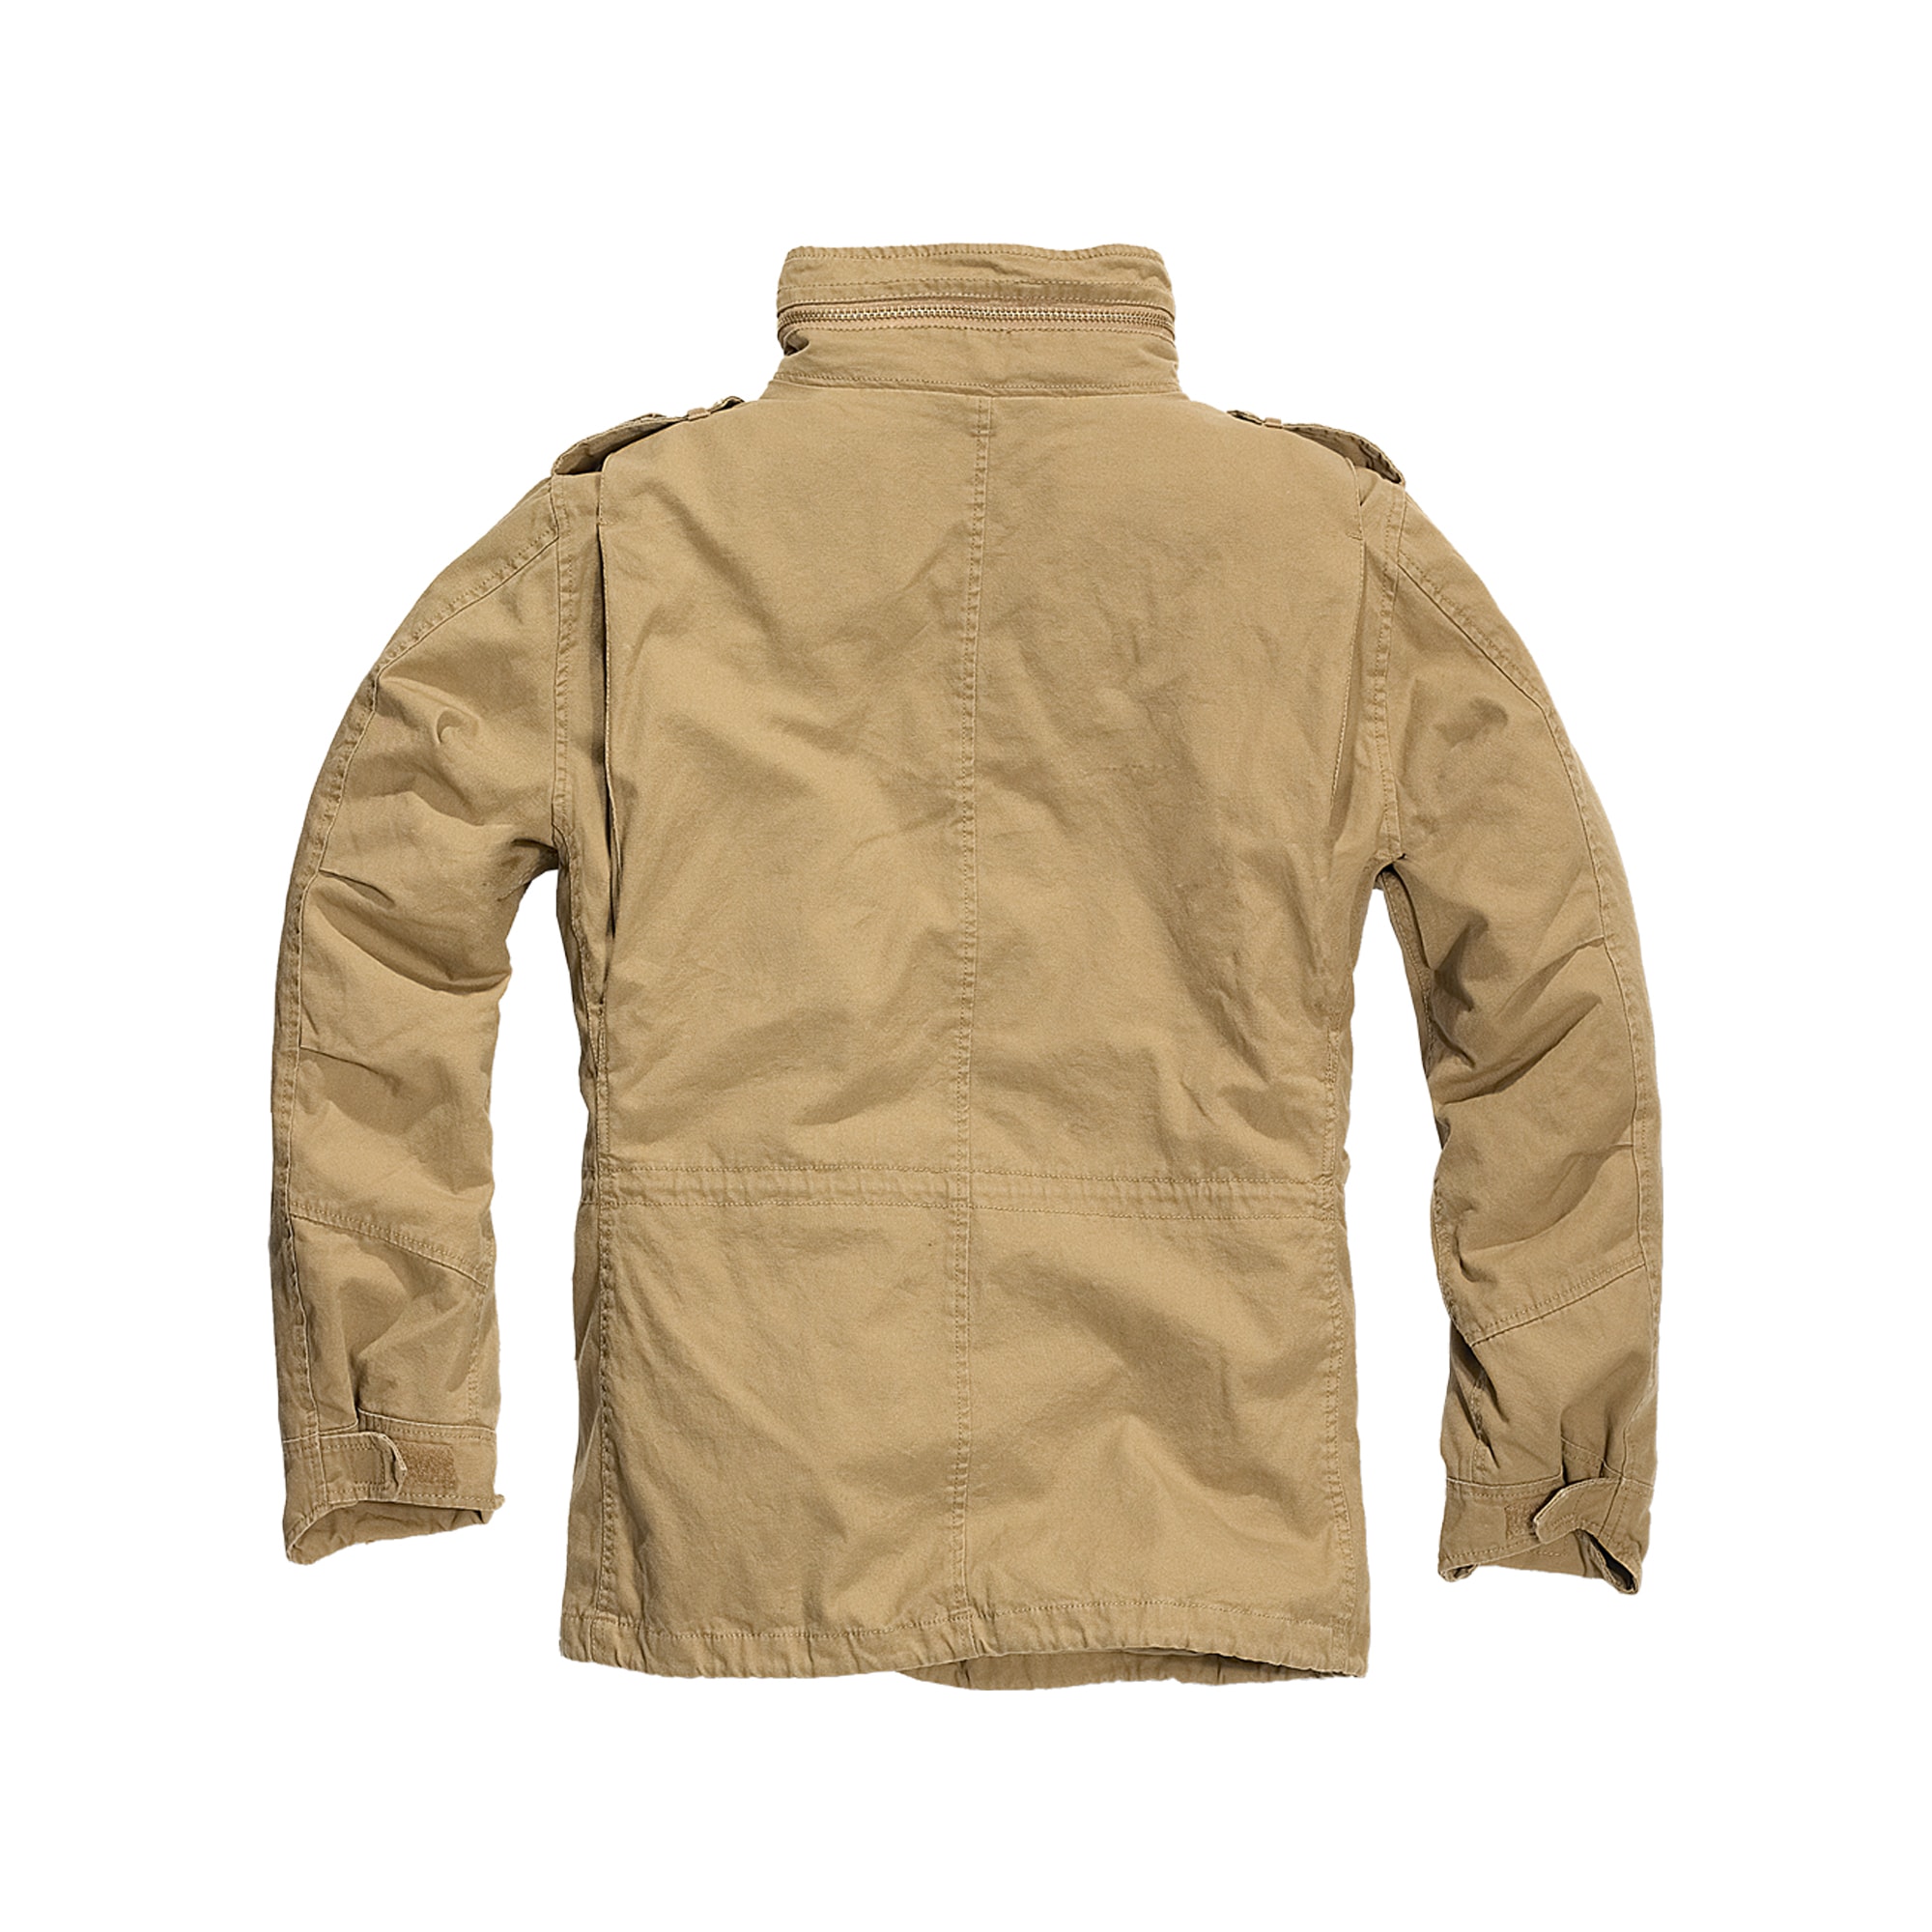 by the Brandit Giant ASMC Jacket Purchase M-65 camel